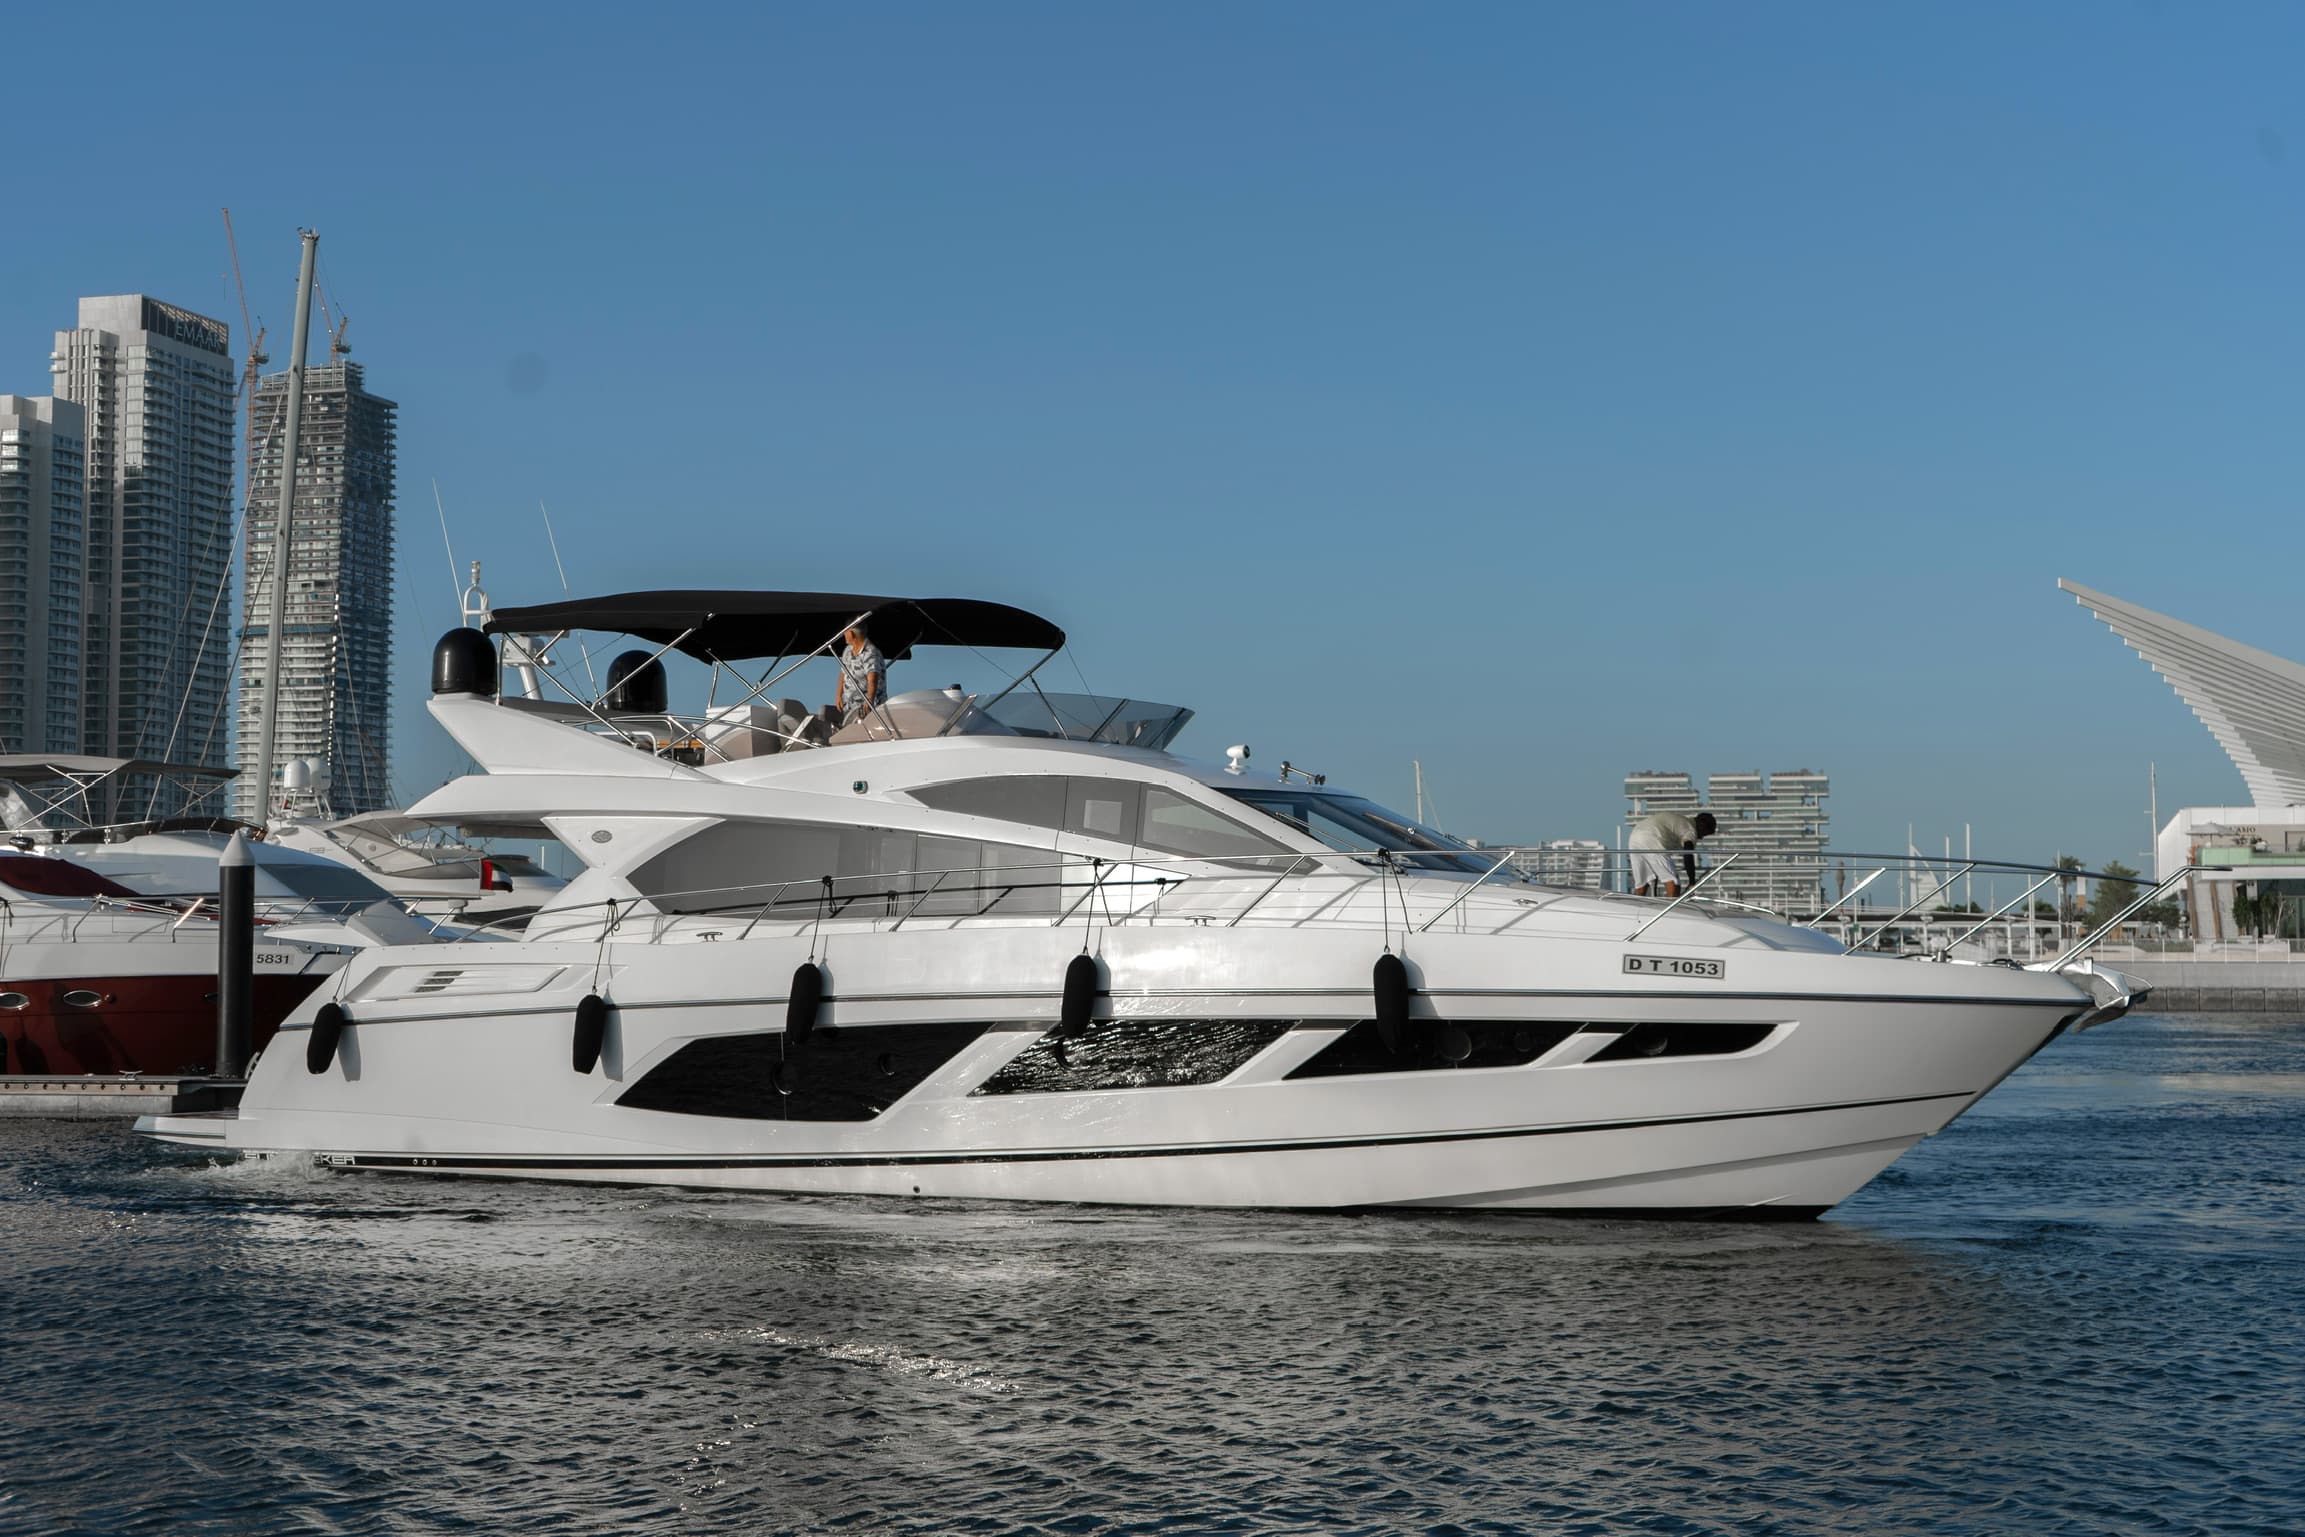 Exterior view of a modern yacht in the harbor